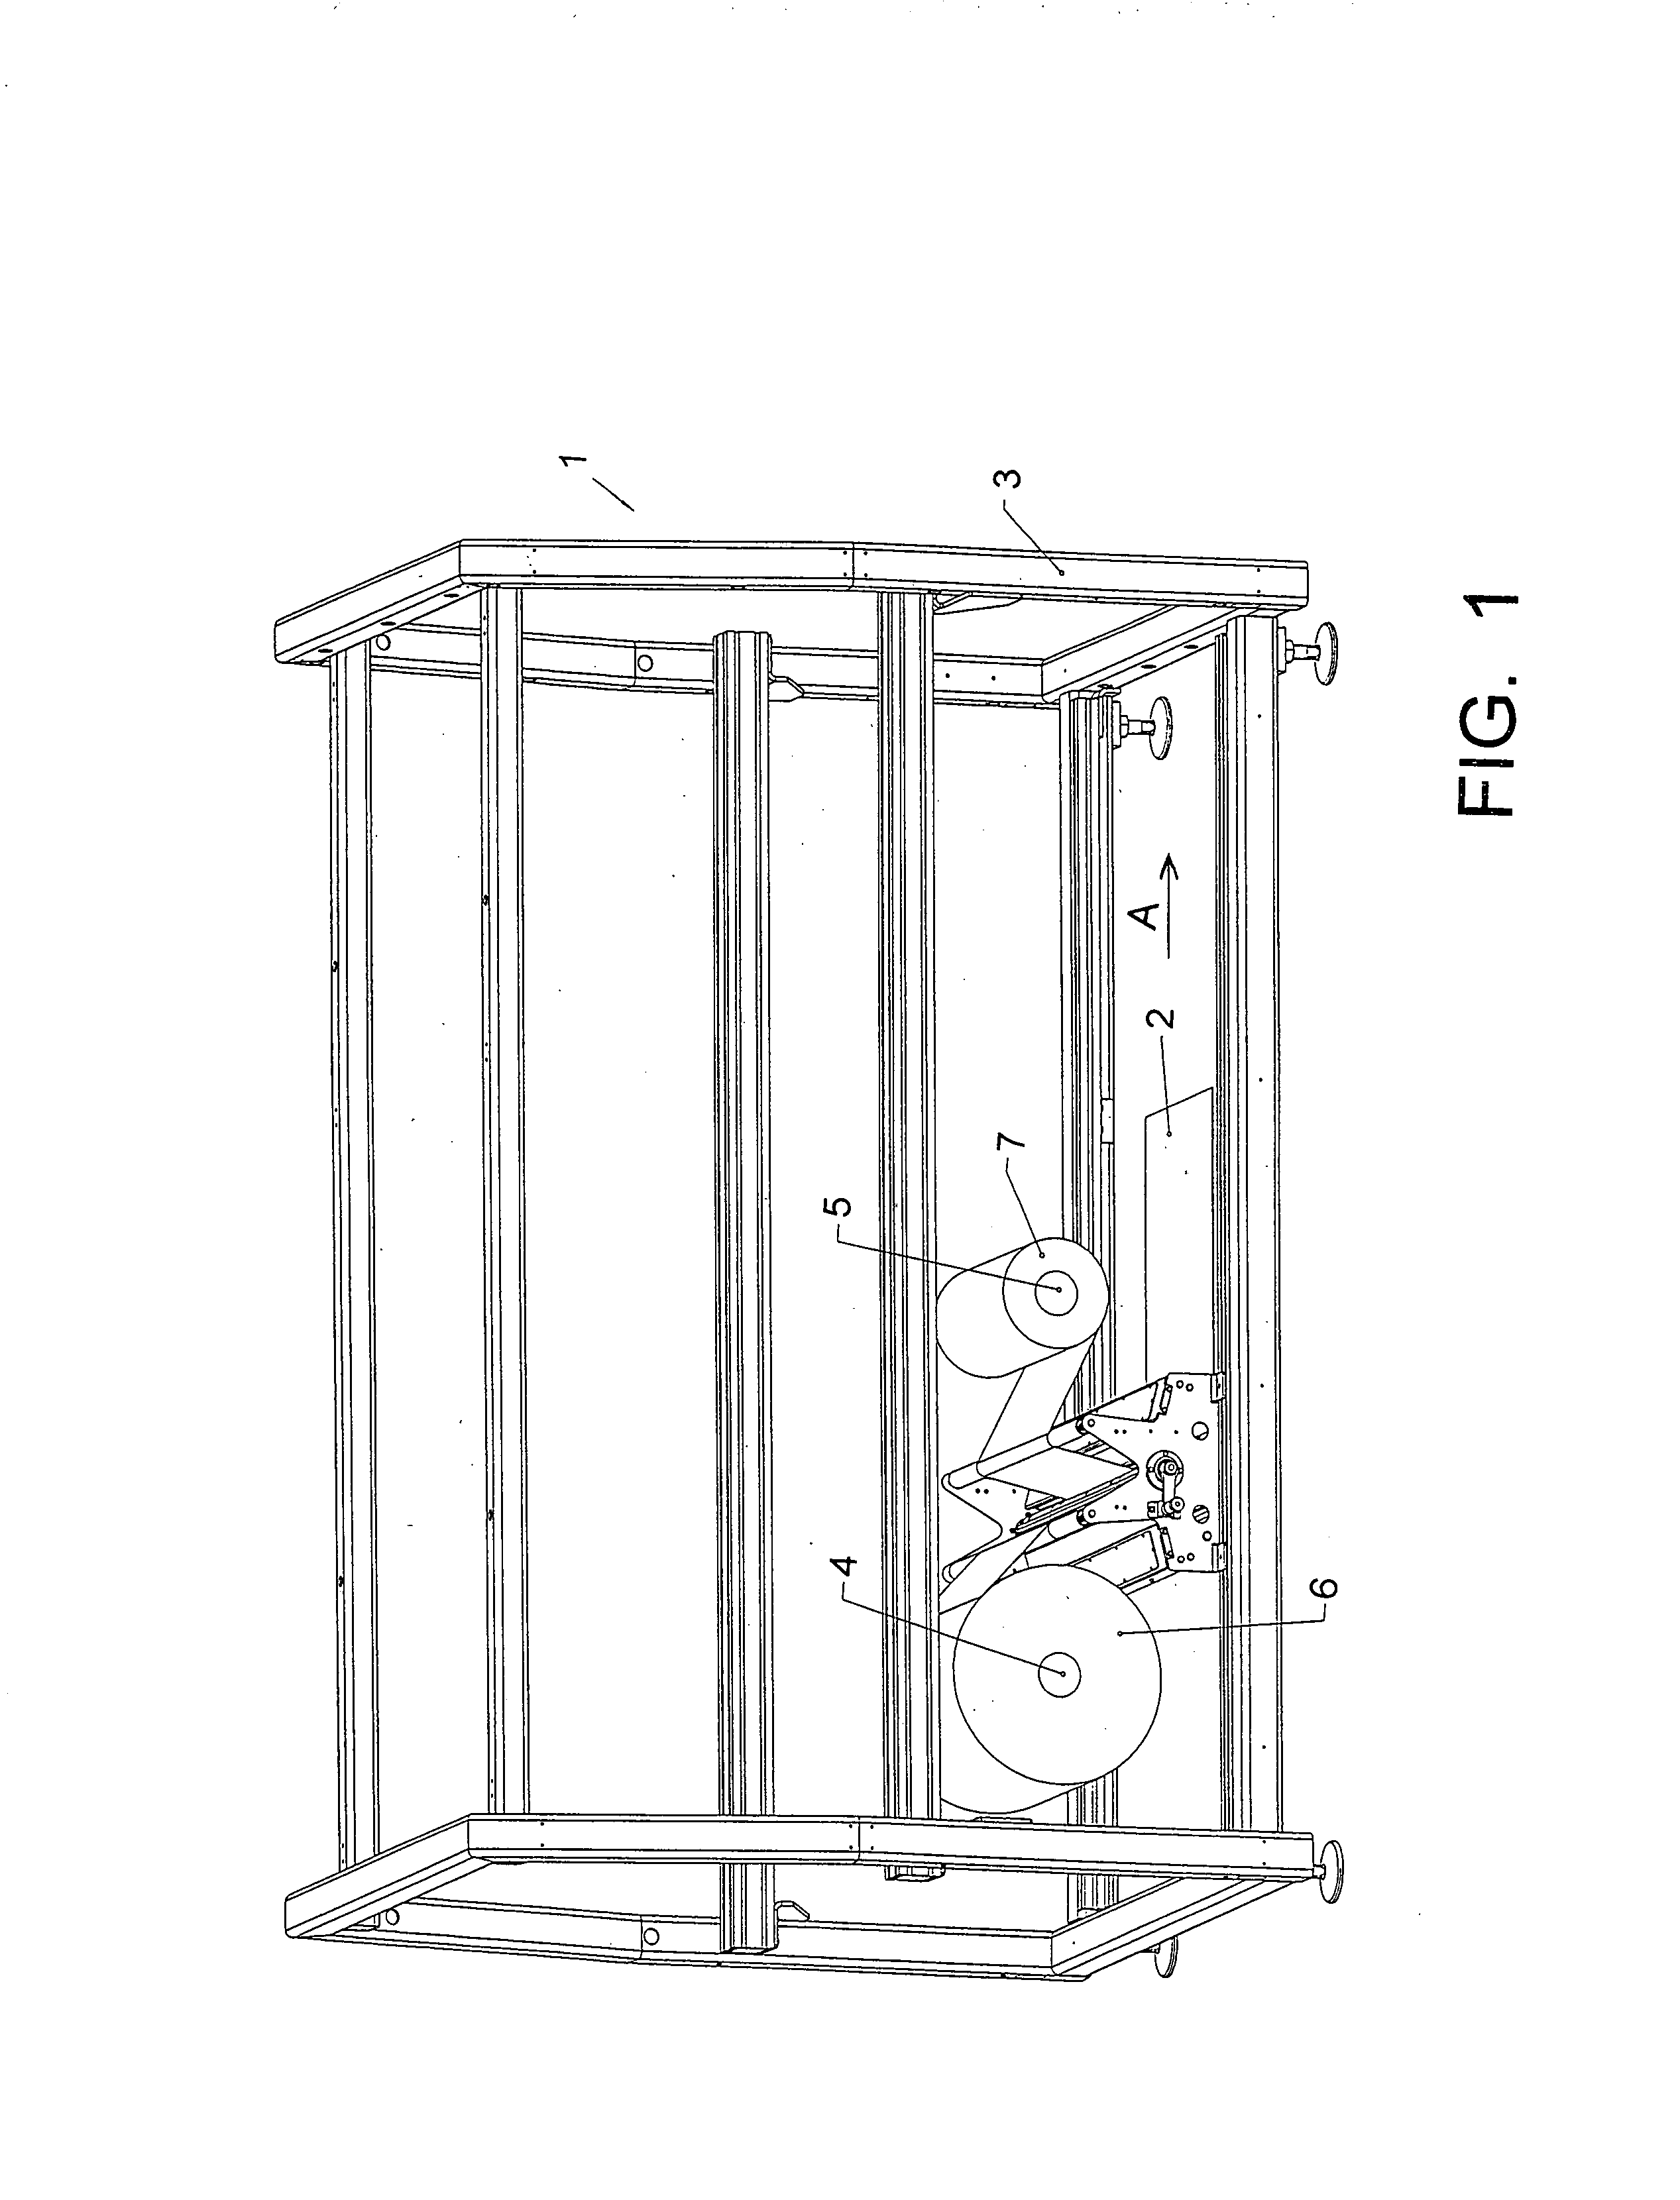 Beverage bottling plant for filling bottles with a liquid beverage material having a machine and method for wrapping filled bottles